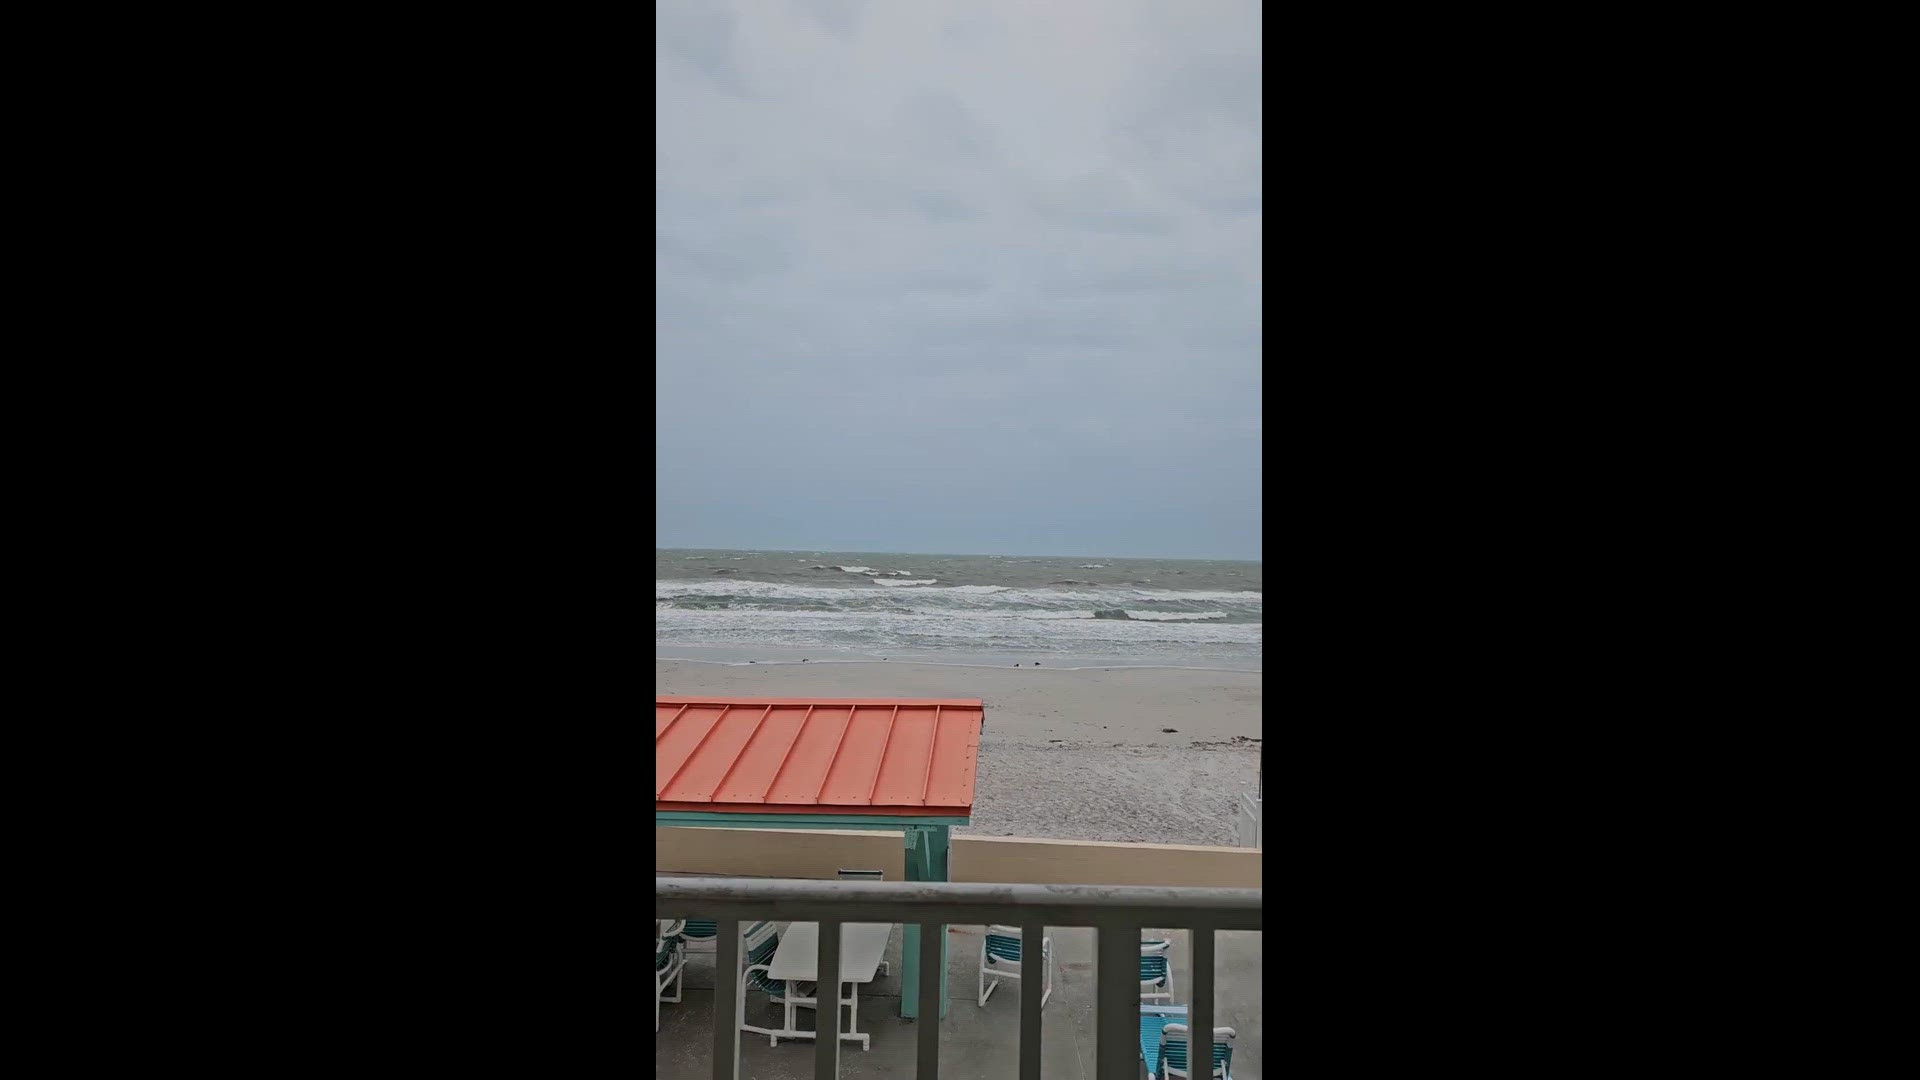 Our vacation spot in Redington Beach. We are locals from Pasco County. So much stronger winds than inland.
Credit: Amber